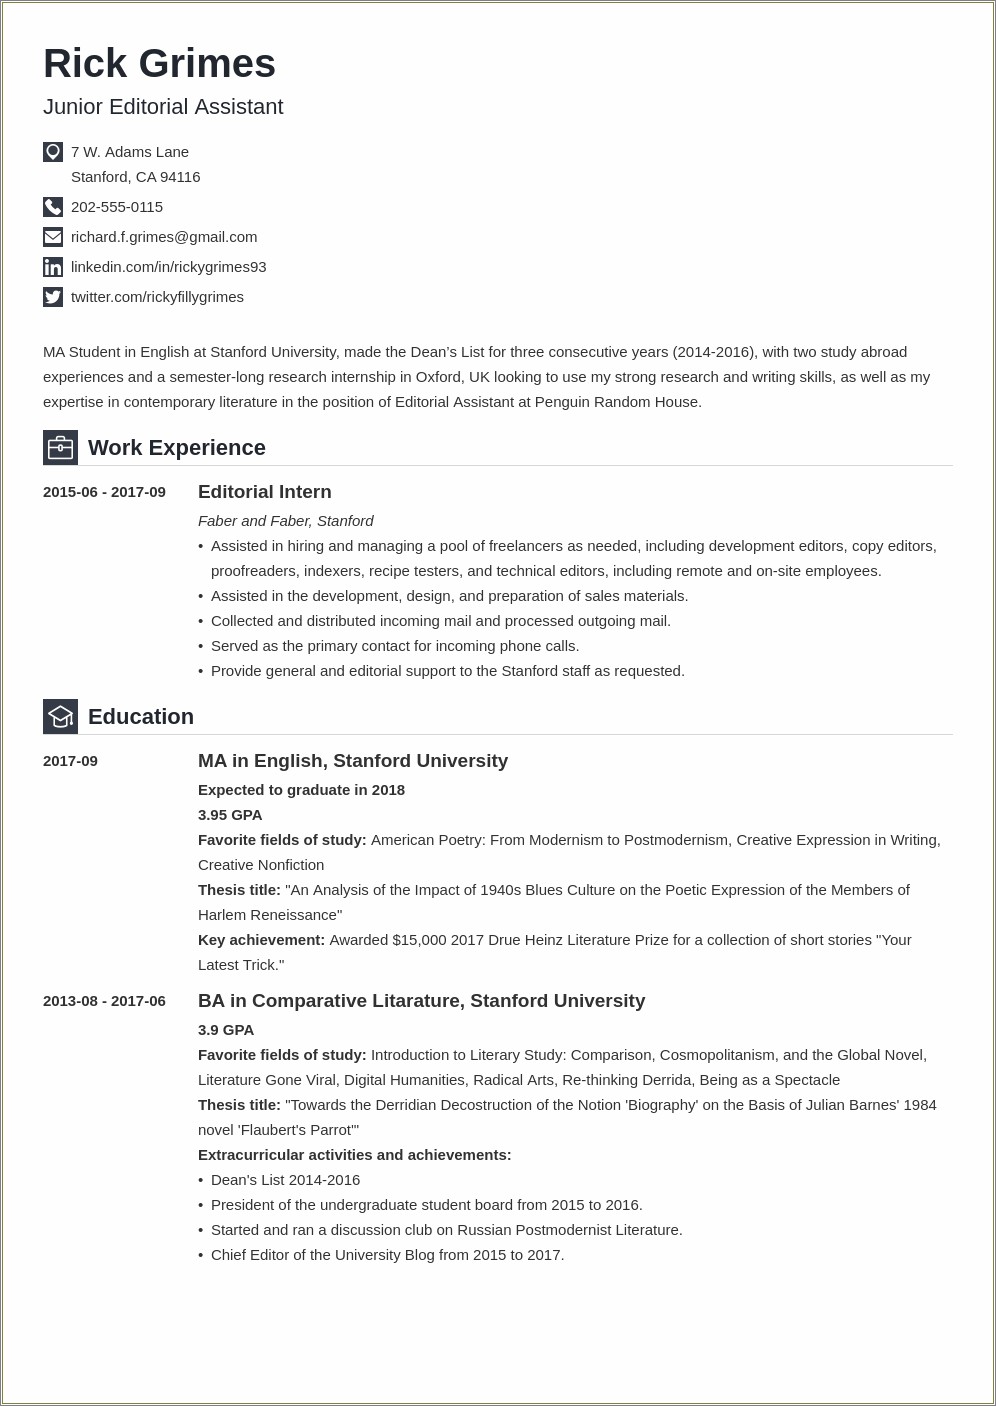 Resume With Only 1 Job Reddit